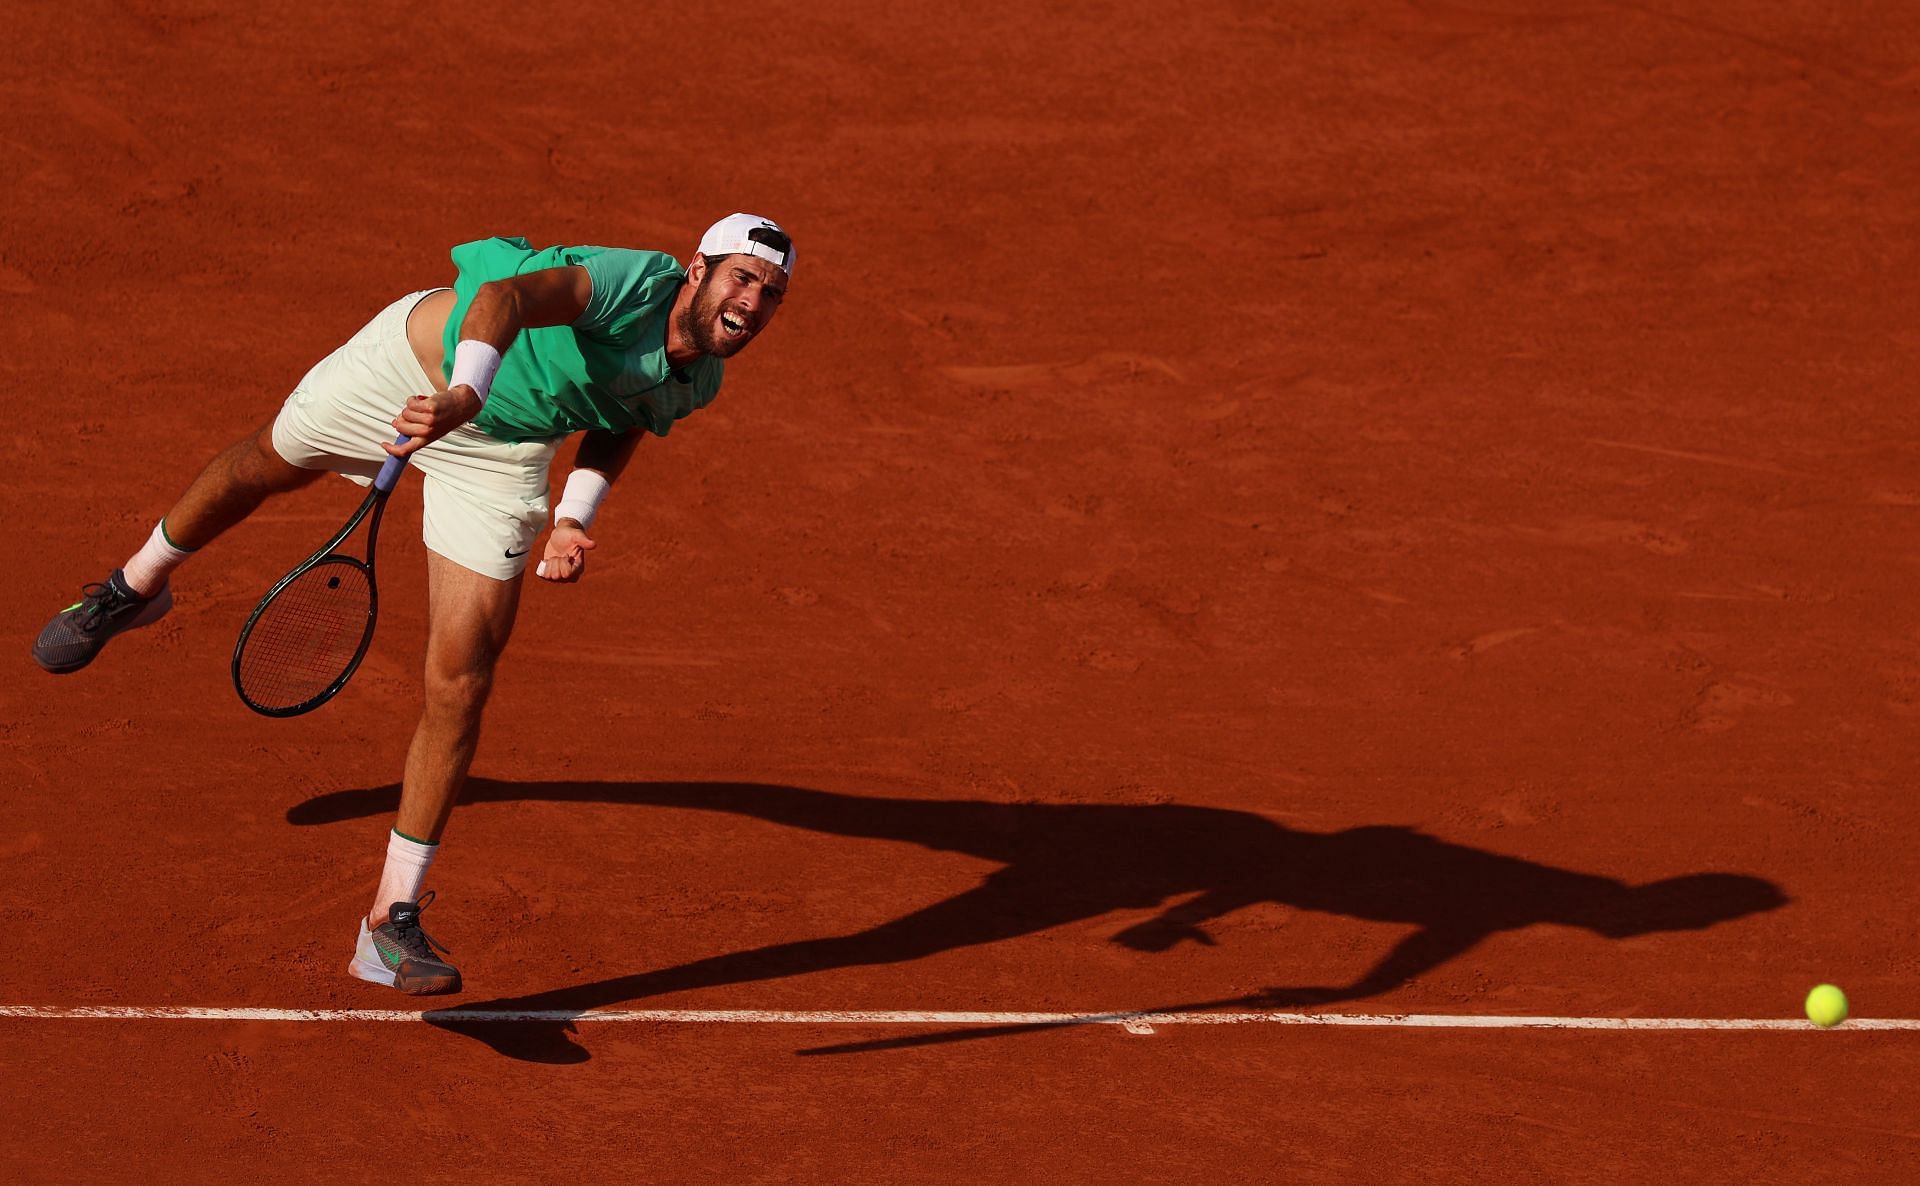 Karen Khachanov in action at the French Open